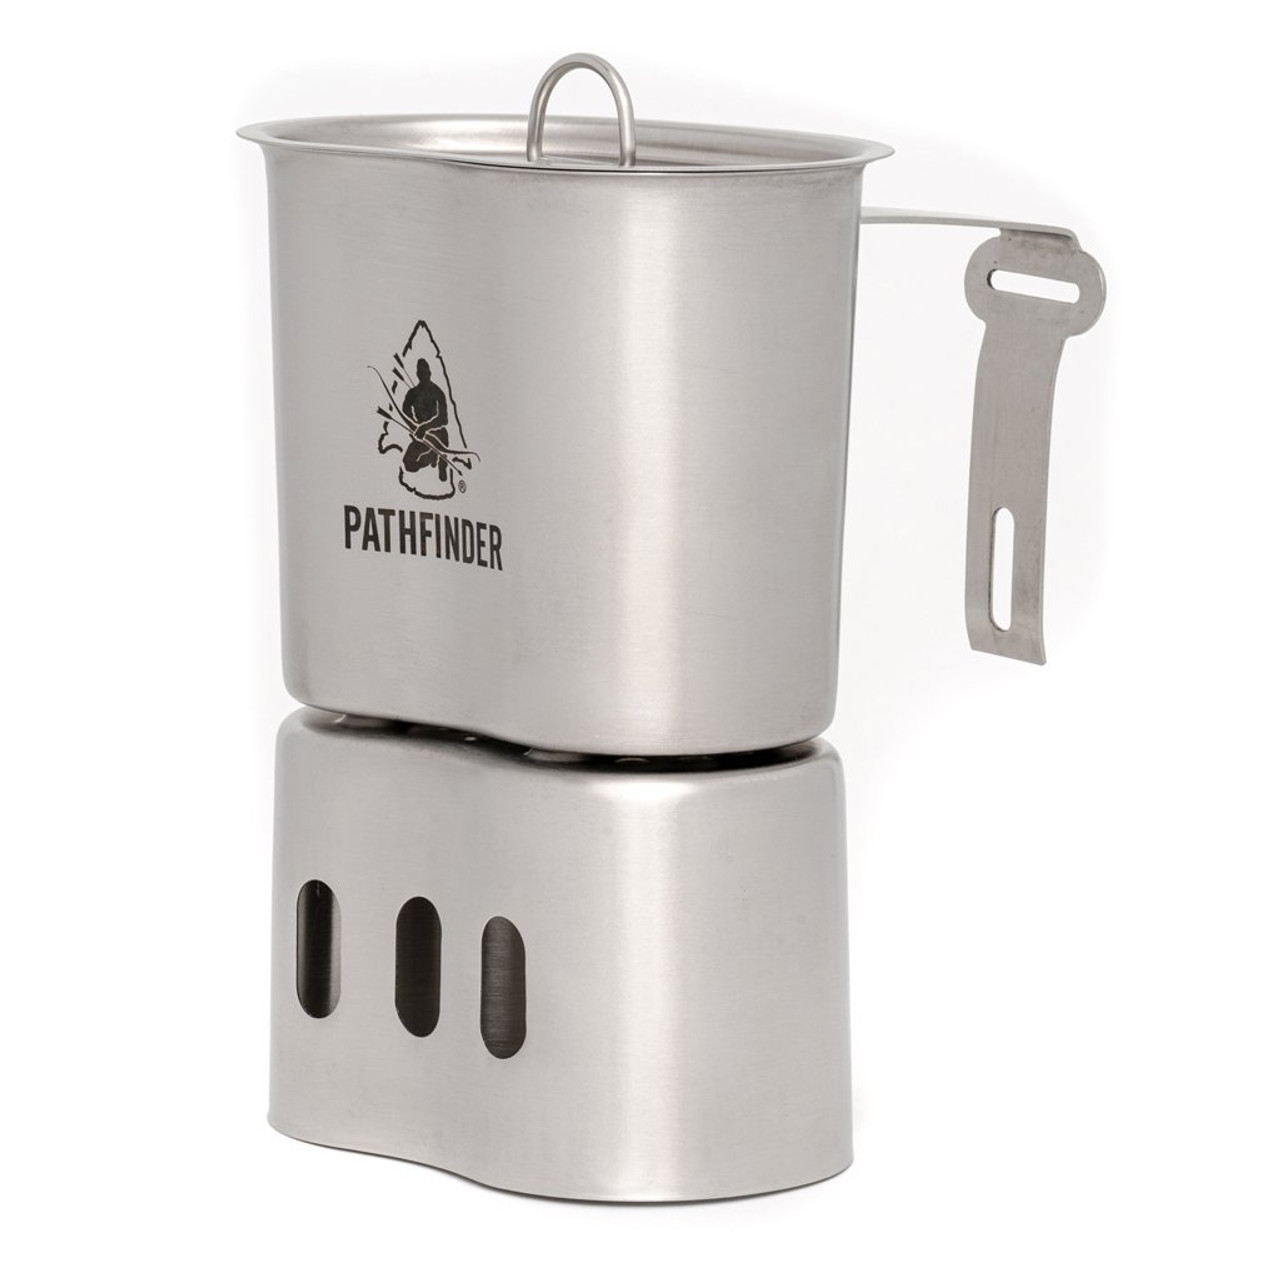 https://cdn11.bigcommerce.com/s-ovptlwt64t/images/stencil/1280x1280/products/608/3526/GEN-Pathfinder-Stainless-Steel-Canteen-Cooking-Kit-3__85315.1636341406.jpg?c=1?imbypass=on